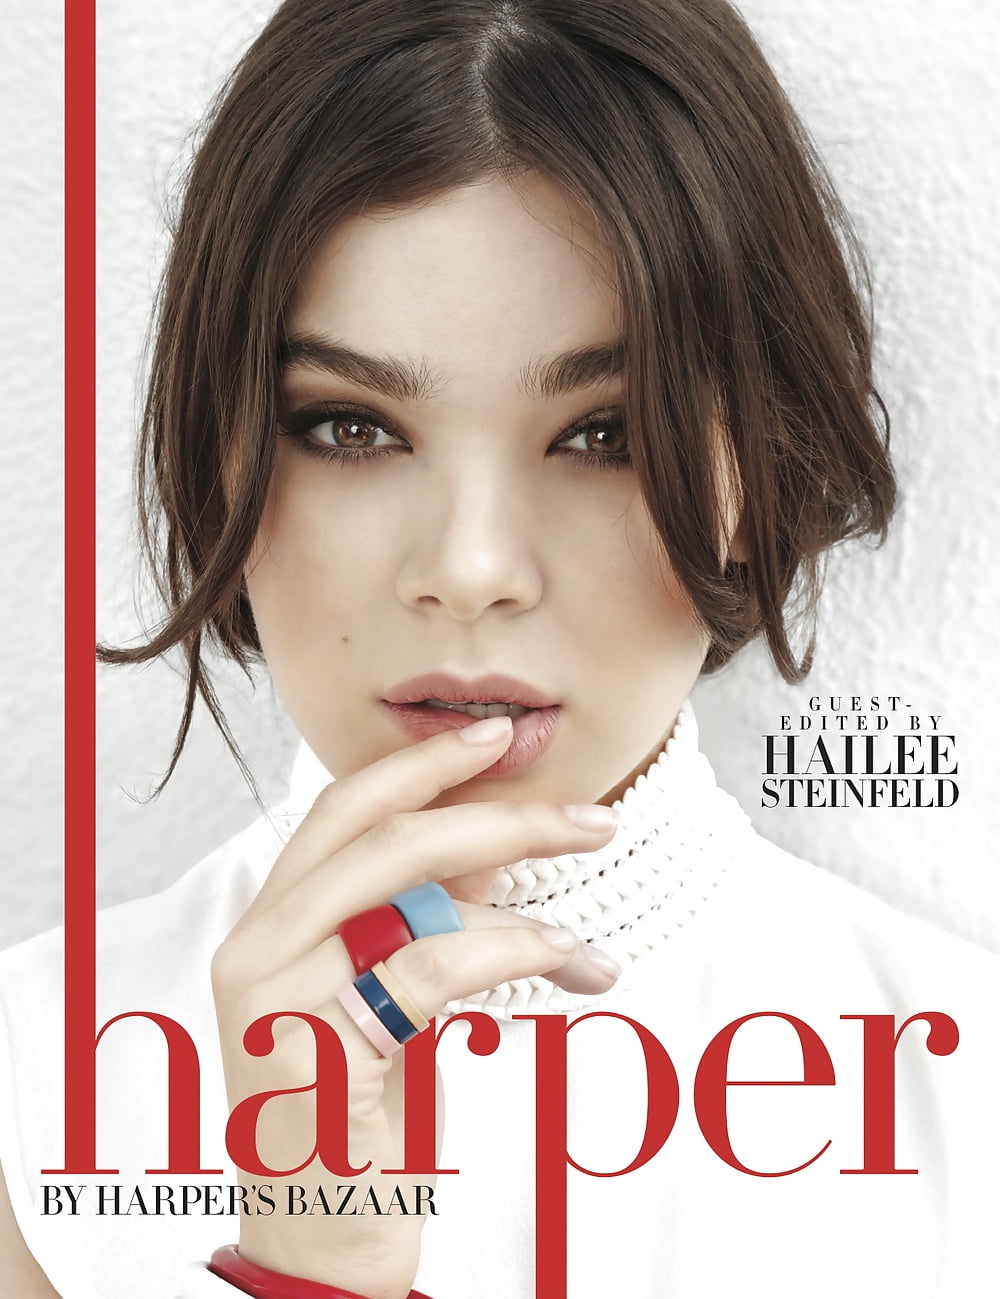 See and Save As hailee steinfeld harpers bazaar porn pict - 4crot.com